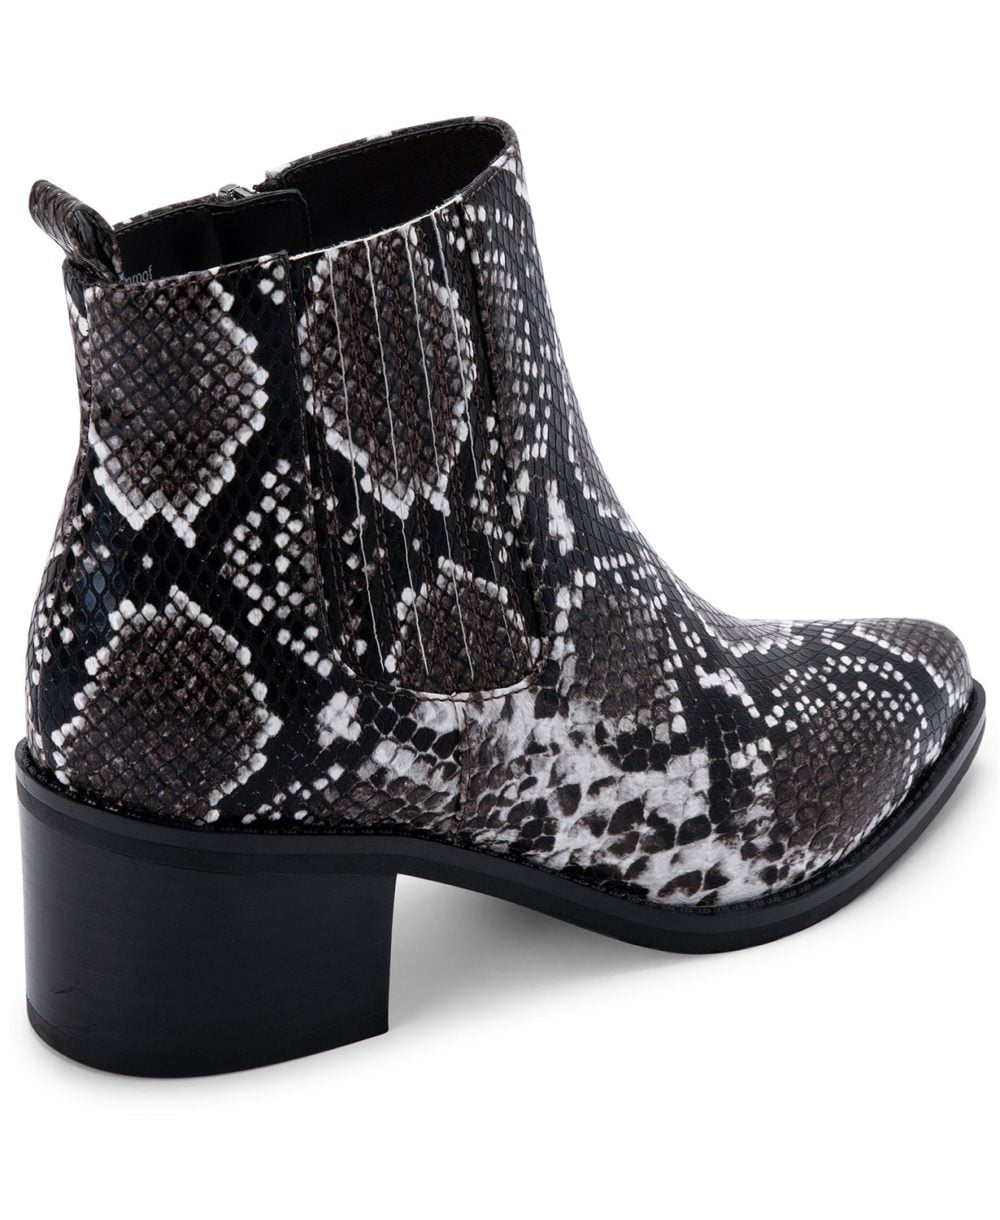 www.couturepoint.com-aqua-college-womens-black-leather-python-print-karlie-waterproof-booties